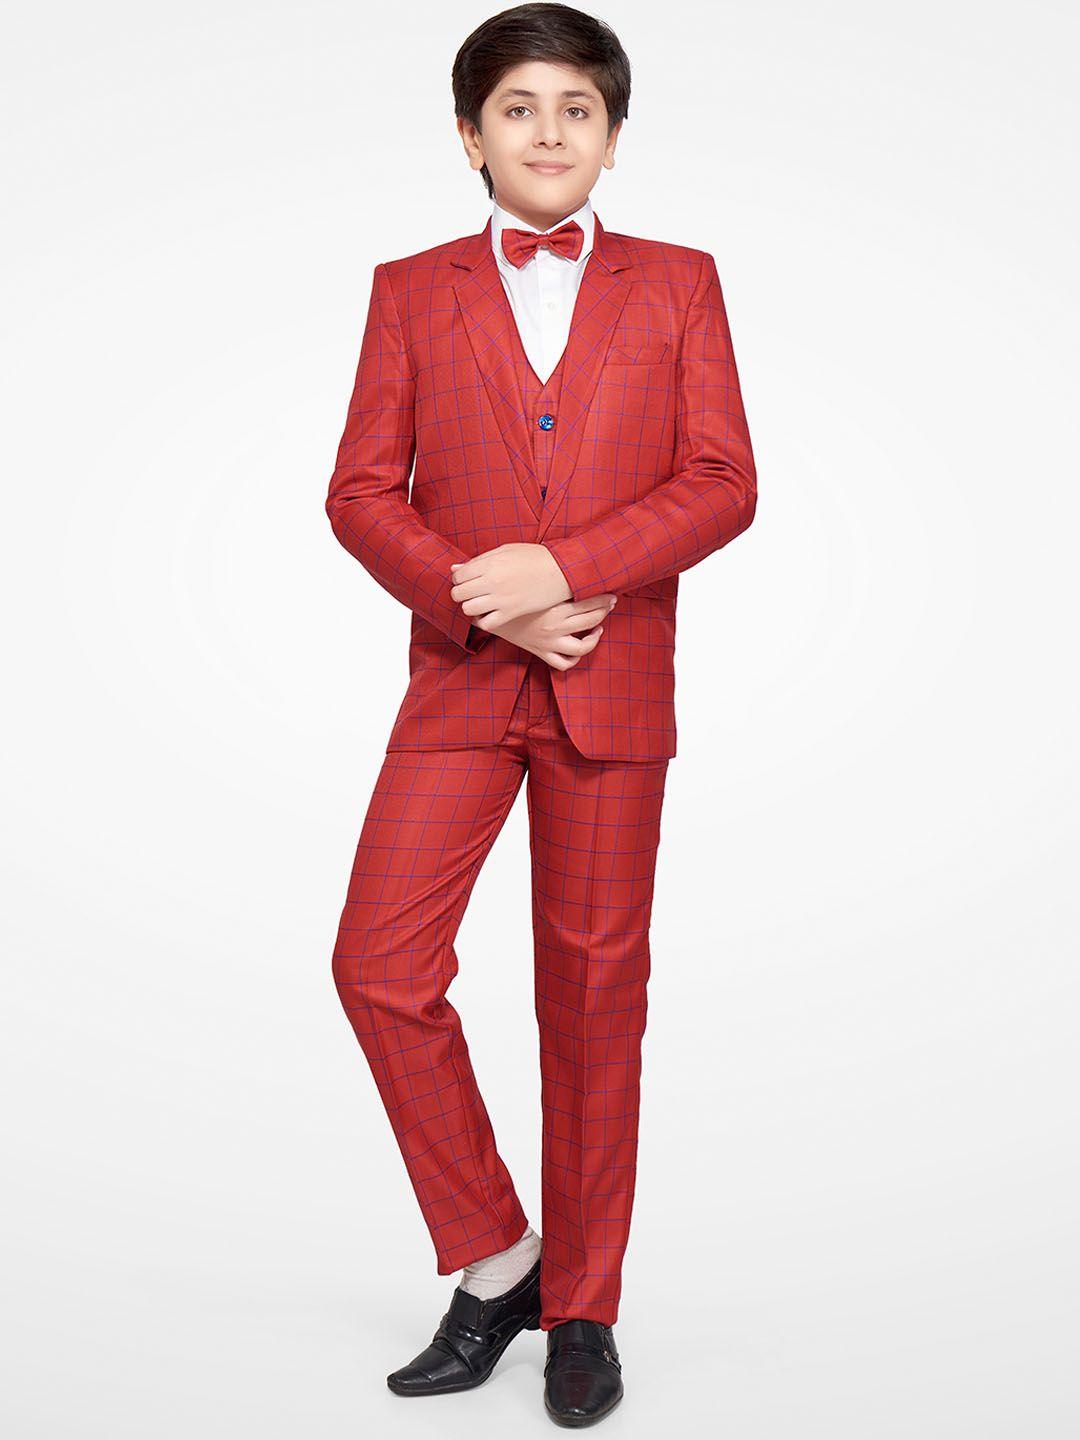 jeetethnics boys red checked 4-piece single-breasted partywear suit